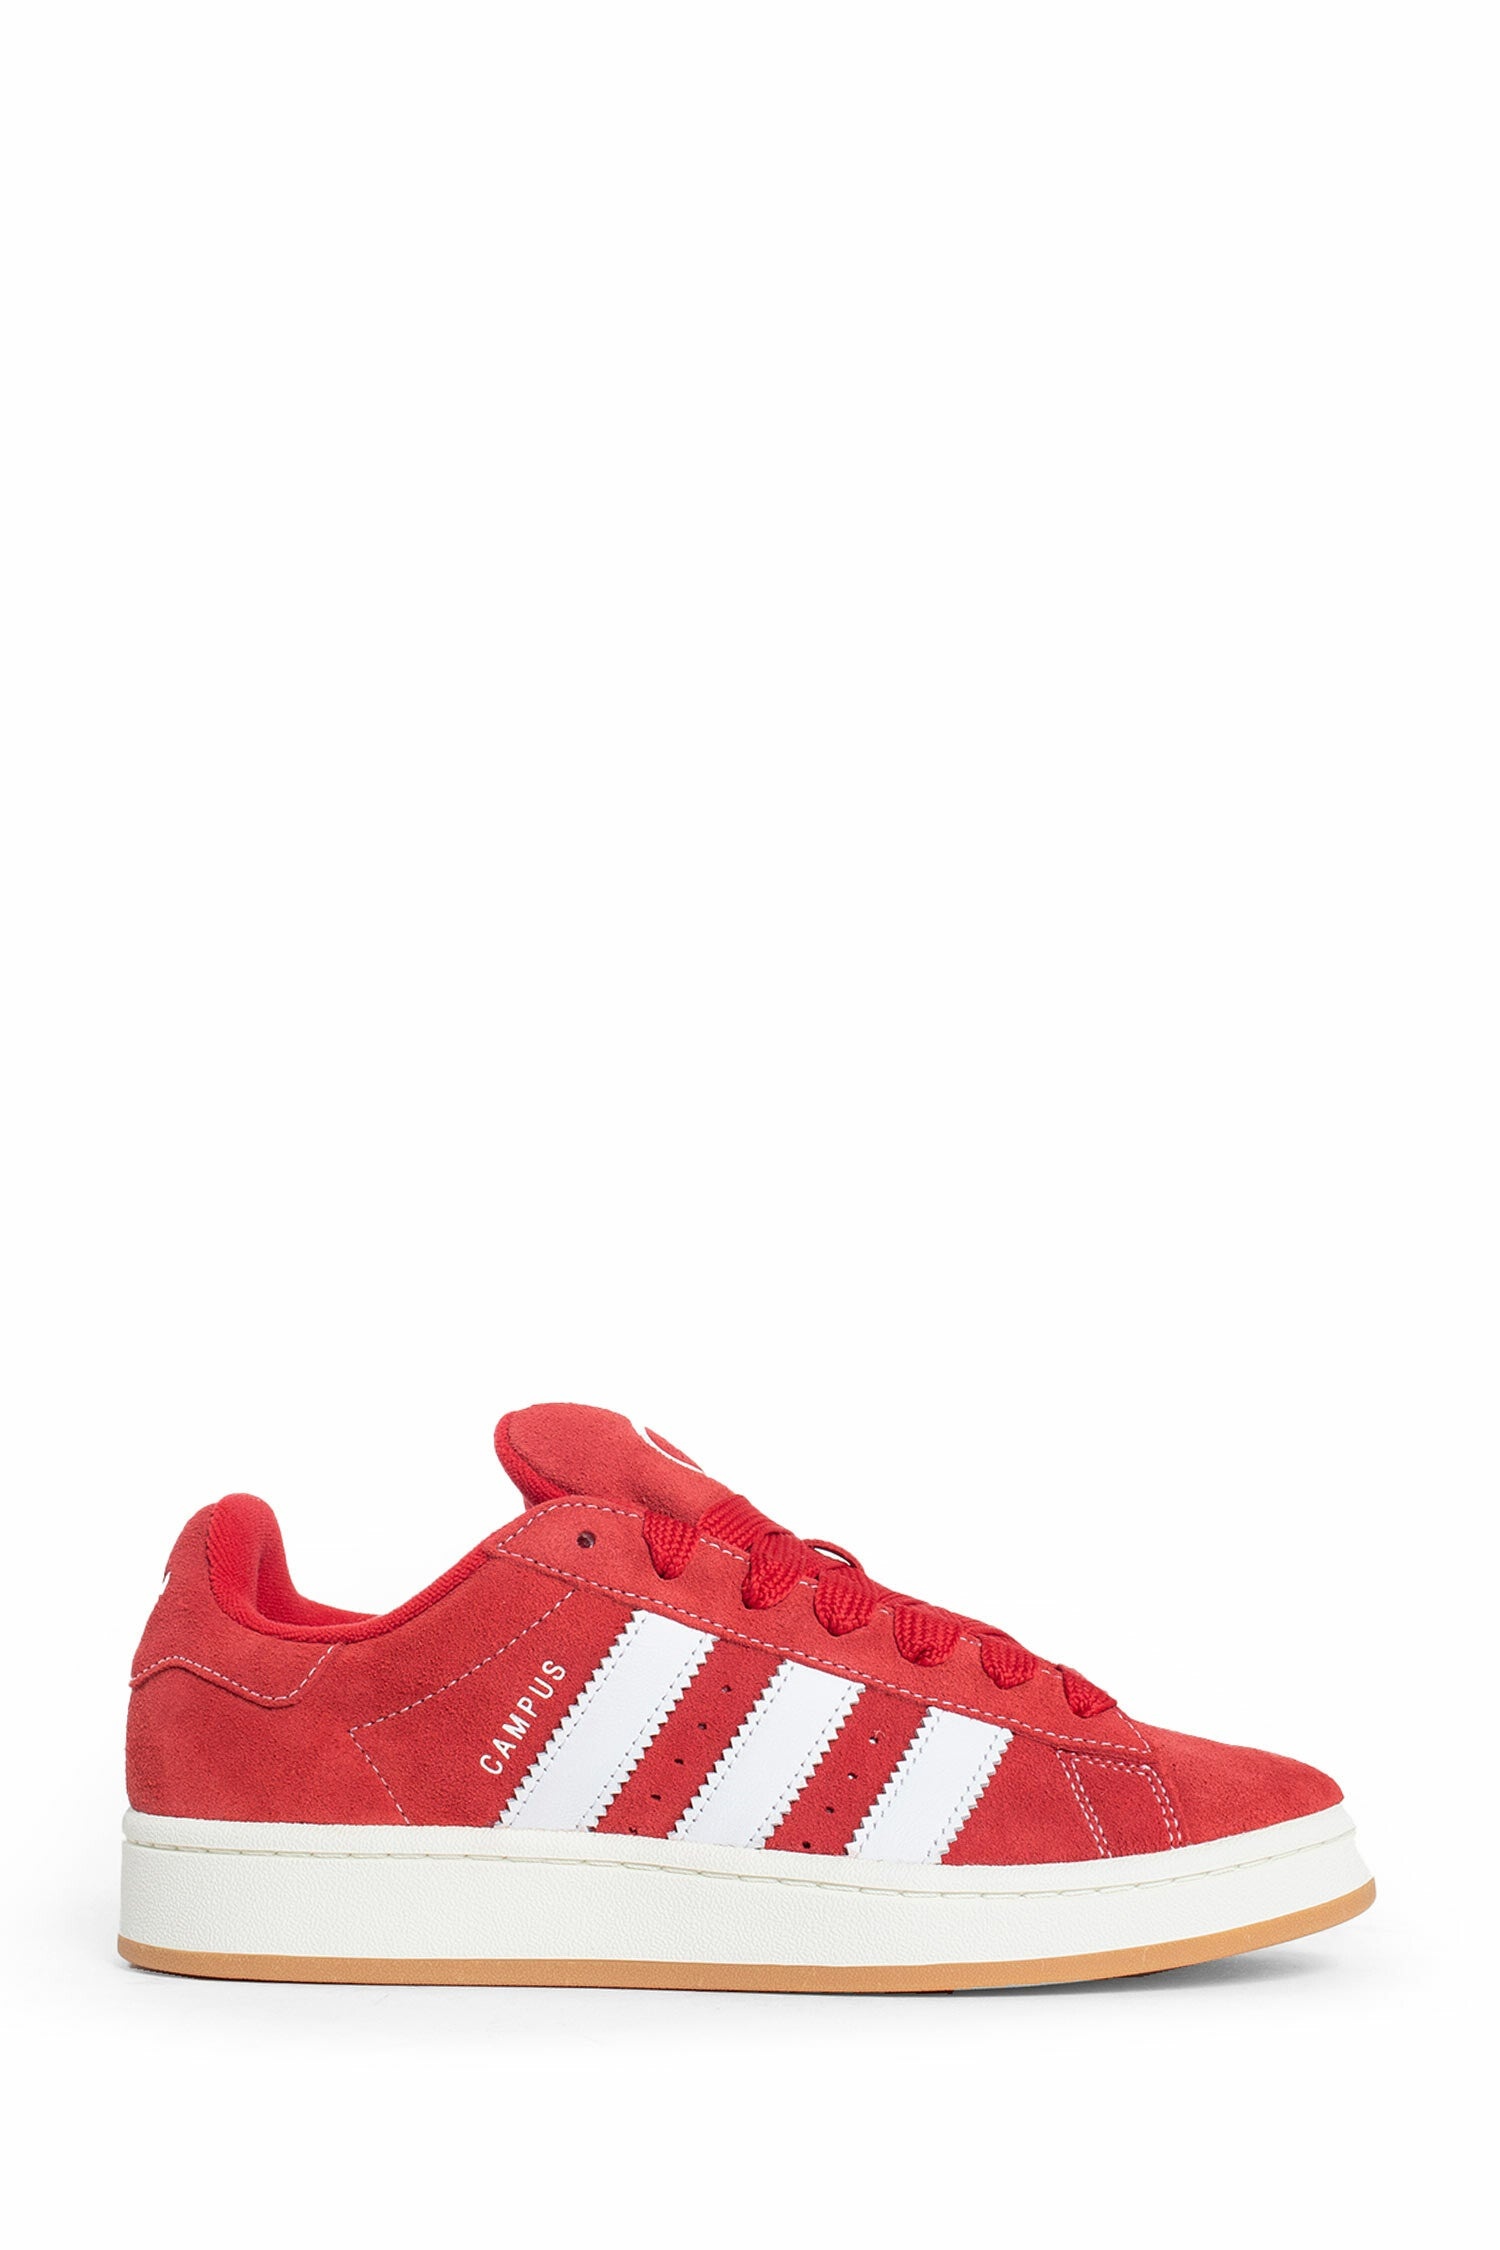 ADIDAS UNISEX RED SNEAKERS - 1